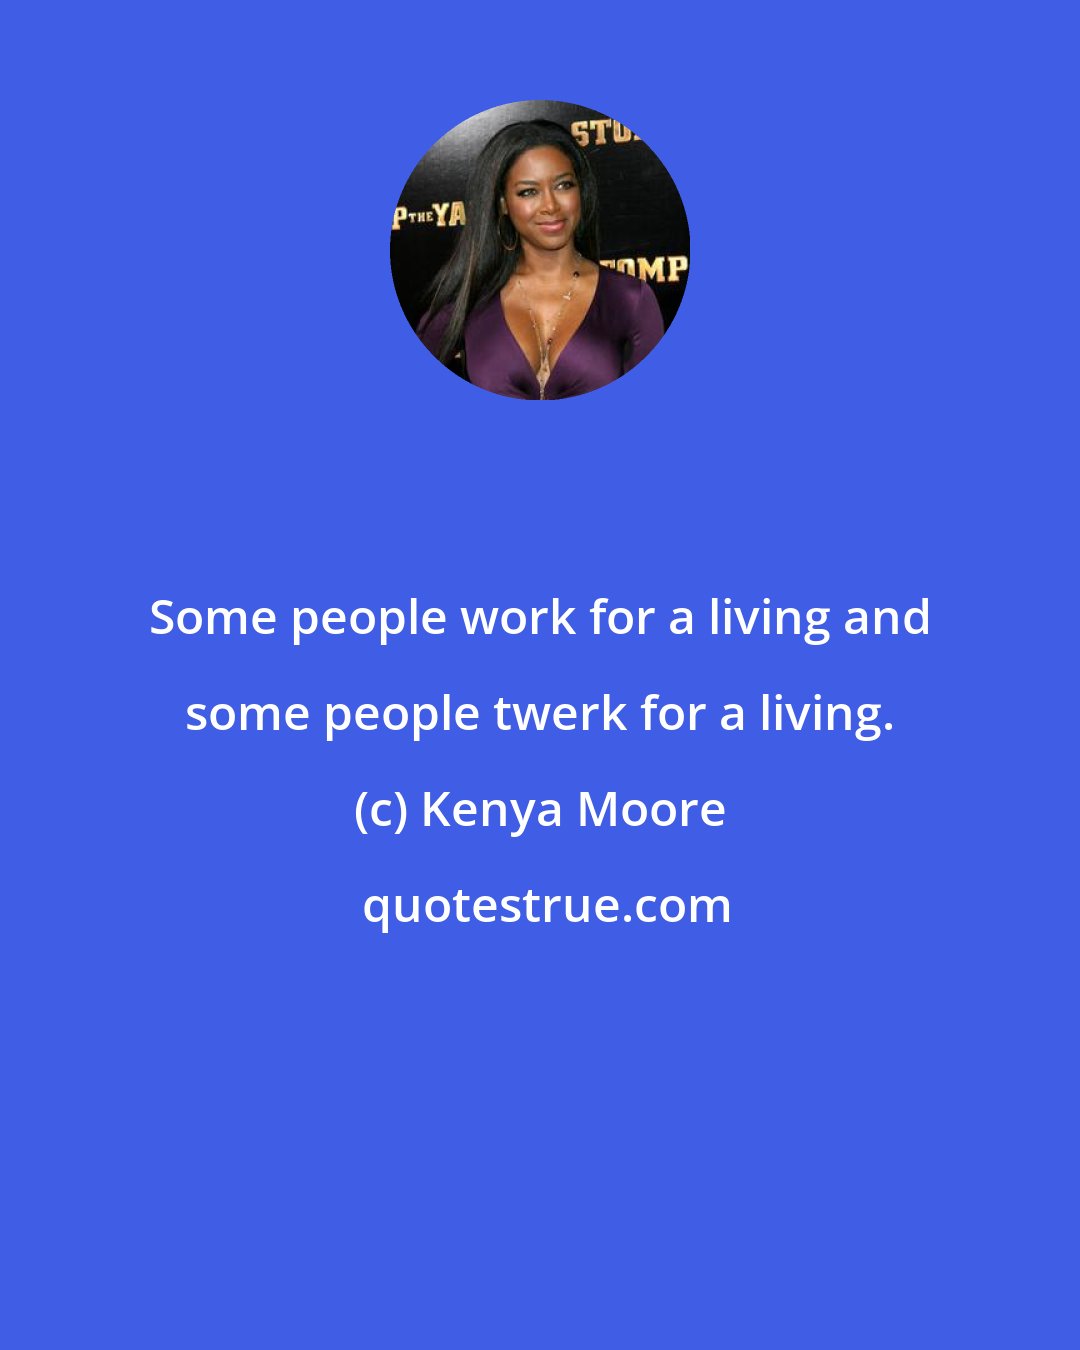 Kenya Moore: Some people work for a living and some people twerk for a living.